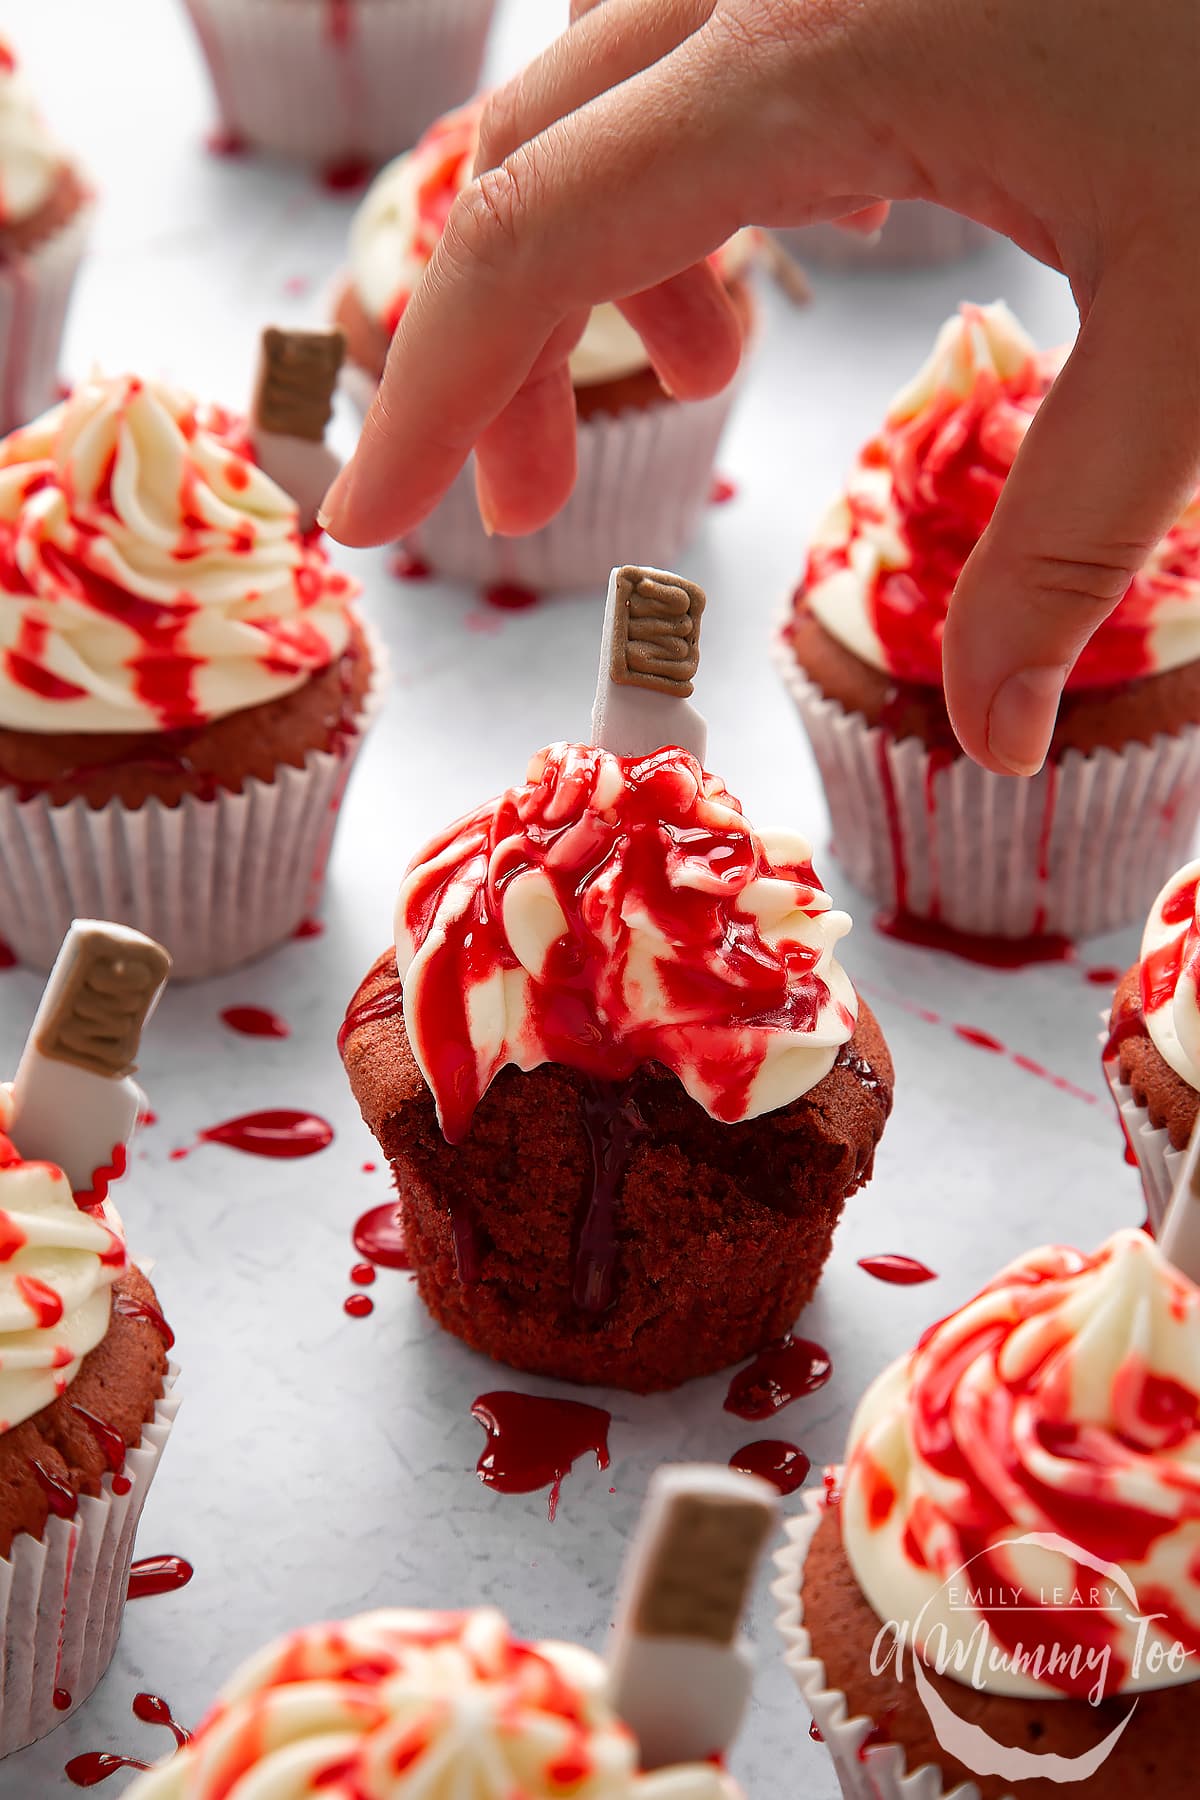 Red velvet Halloween cupcakes, spattered with red syrup. A hand reaches for one with a bite out of it.